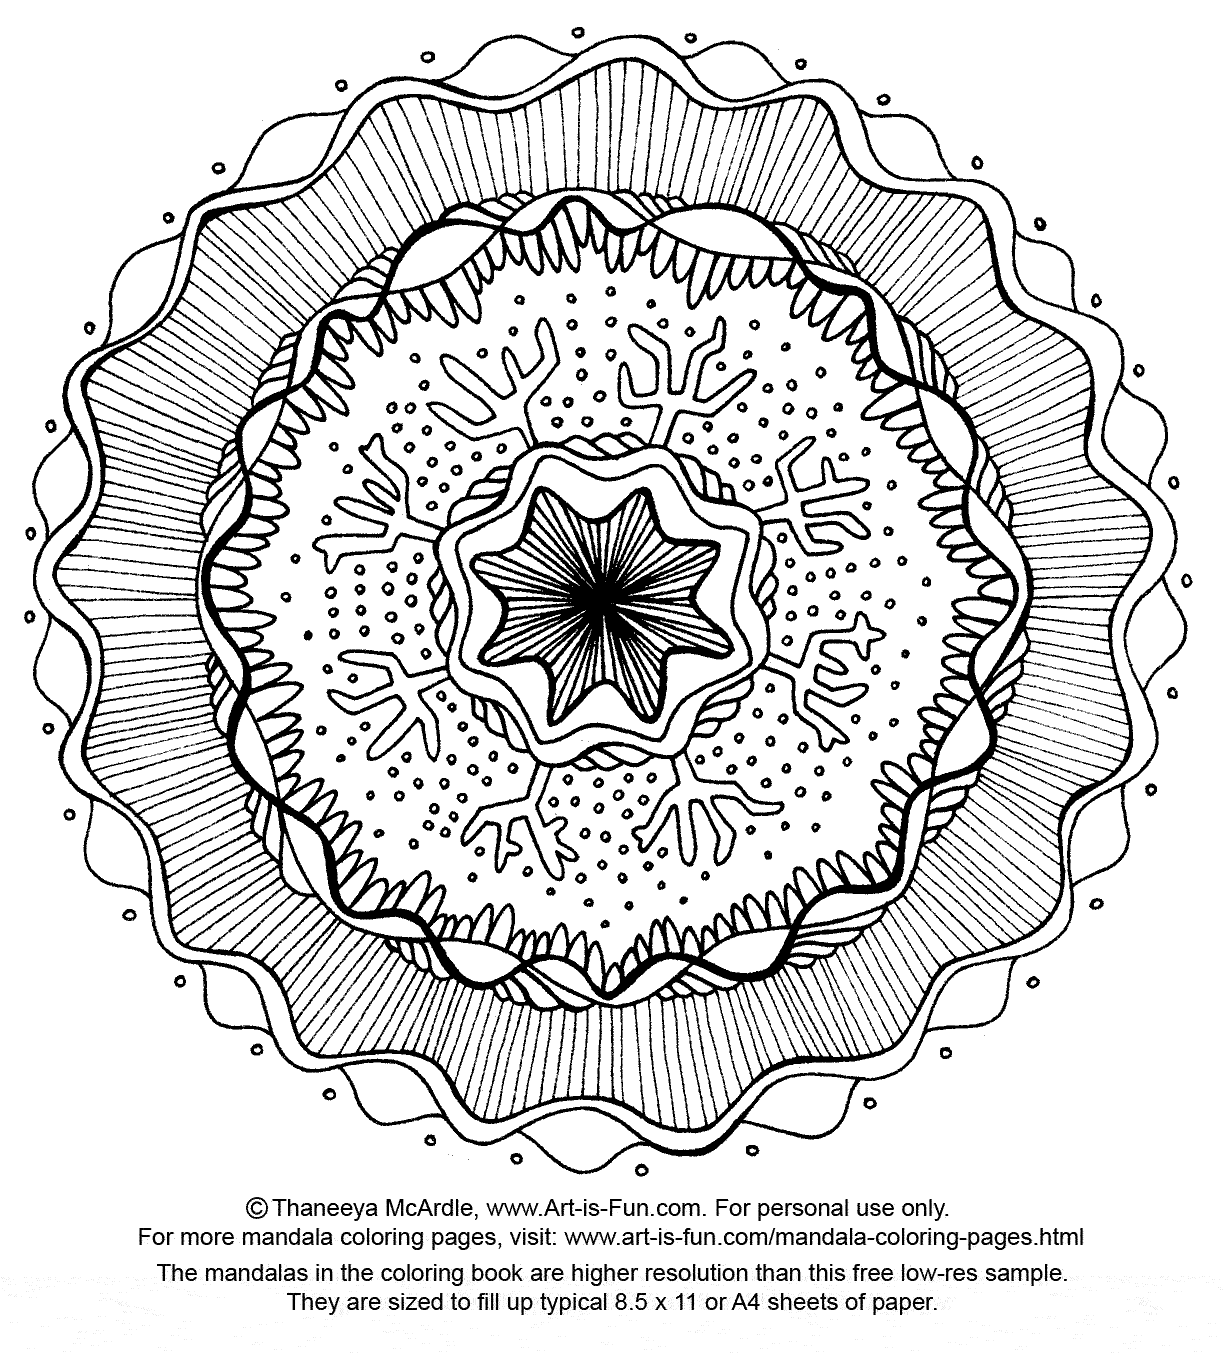 Mandala Coloring pages | FREE coloring pages | #41